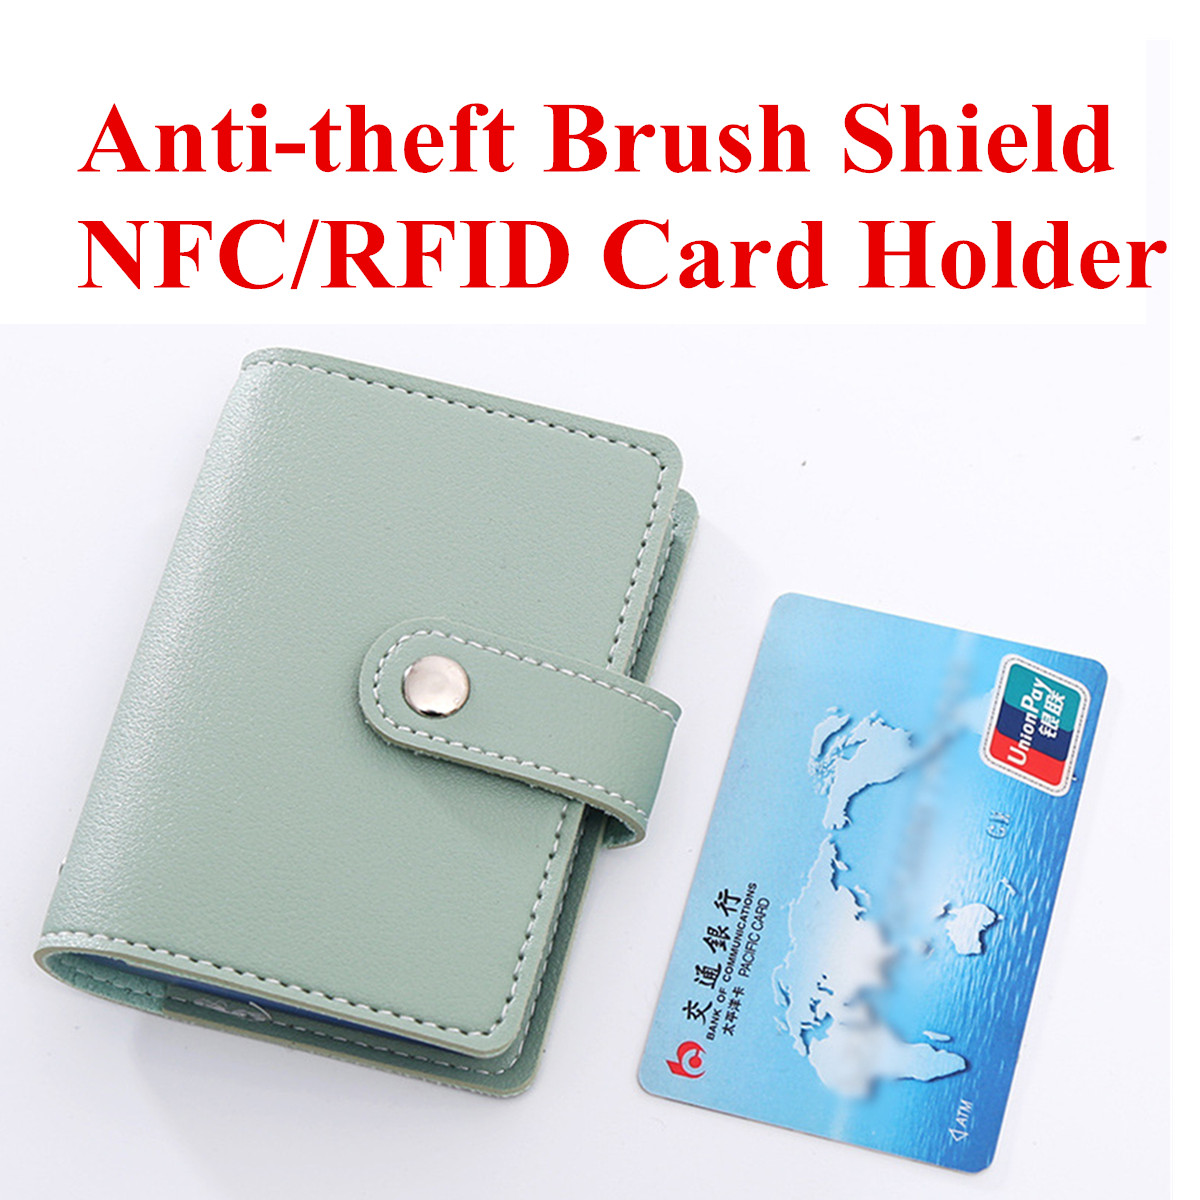 26-Card-Slots-Portable-Leather-Wallet-Anti-theft-Brush-Shield-NFCRFID-Card-Holder-1644277-4